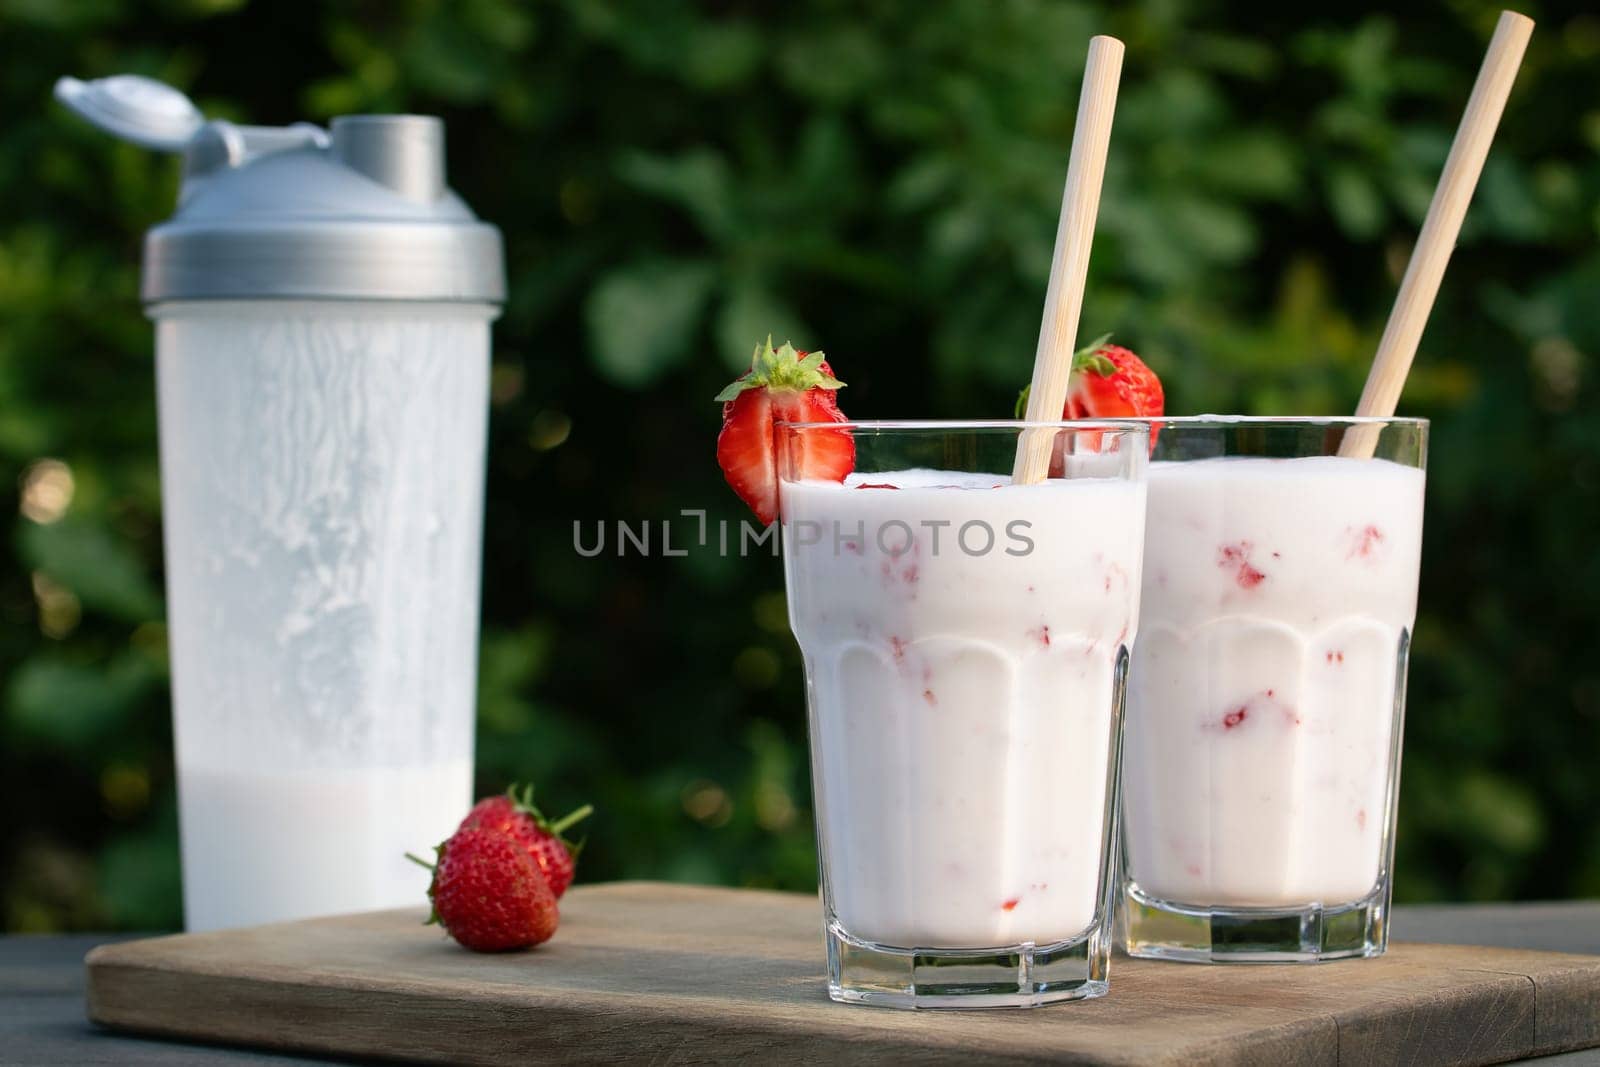 Protein shake from yogurt and strawberries in a shaker and two glass glasses on a wooden table.